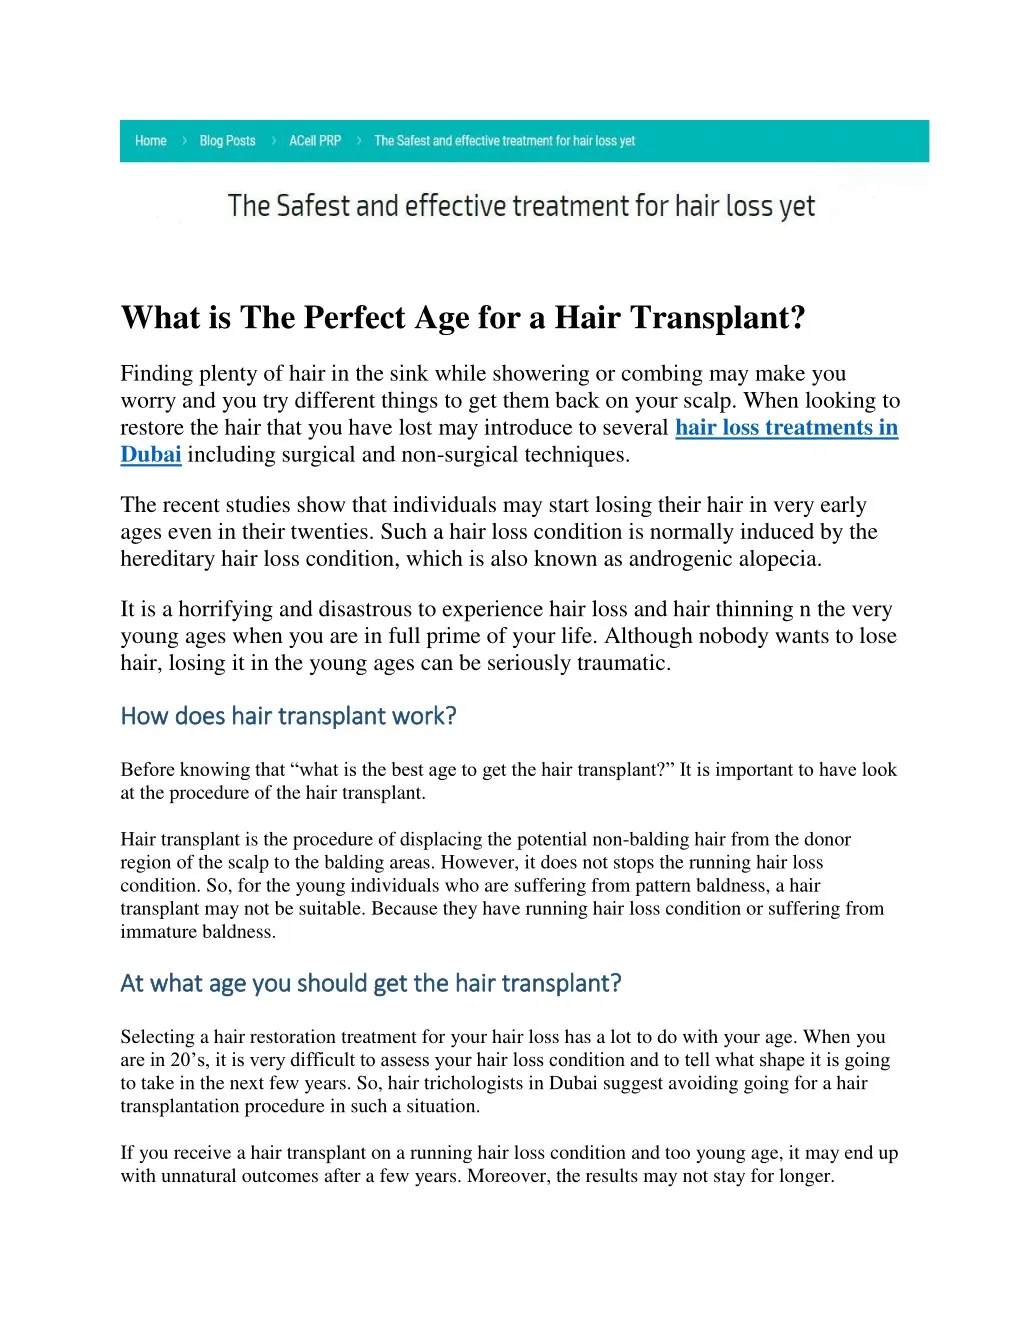 what is the perfect age for a hair transplant